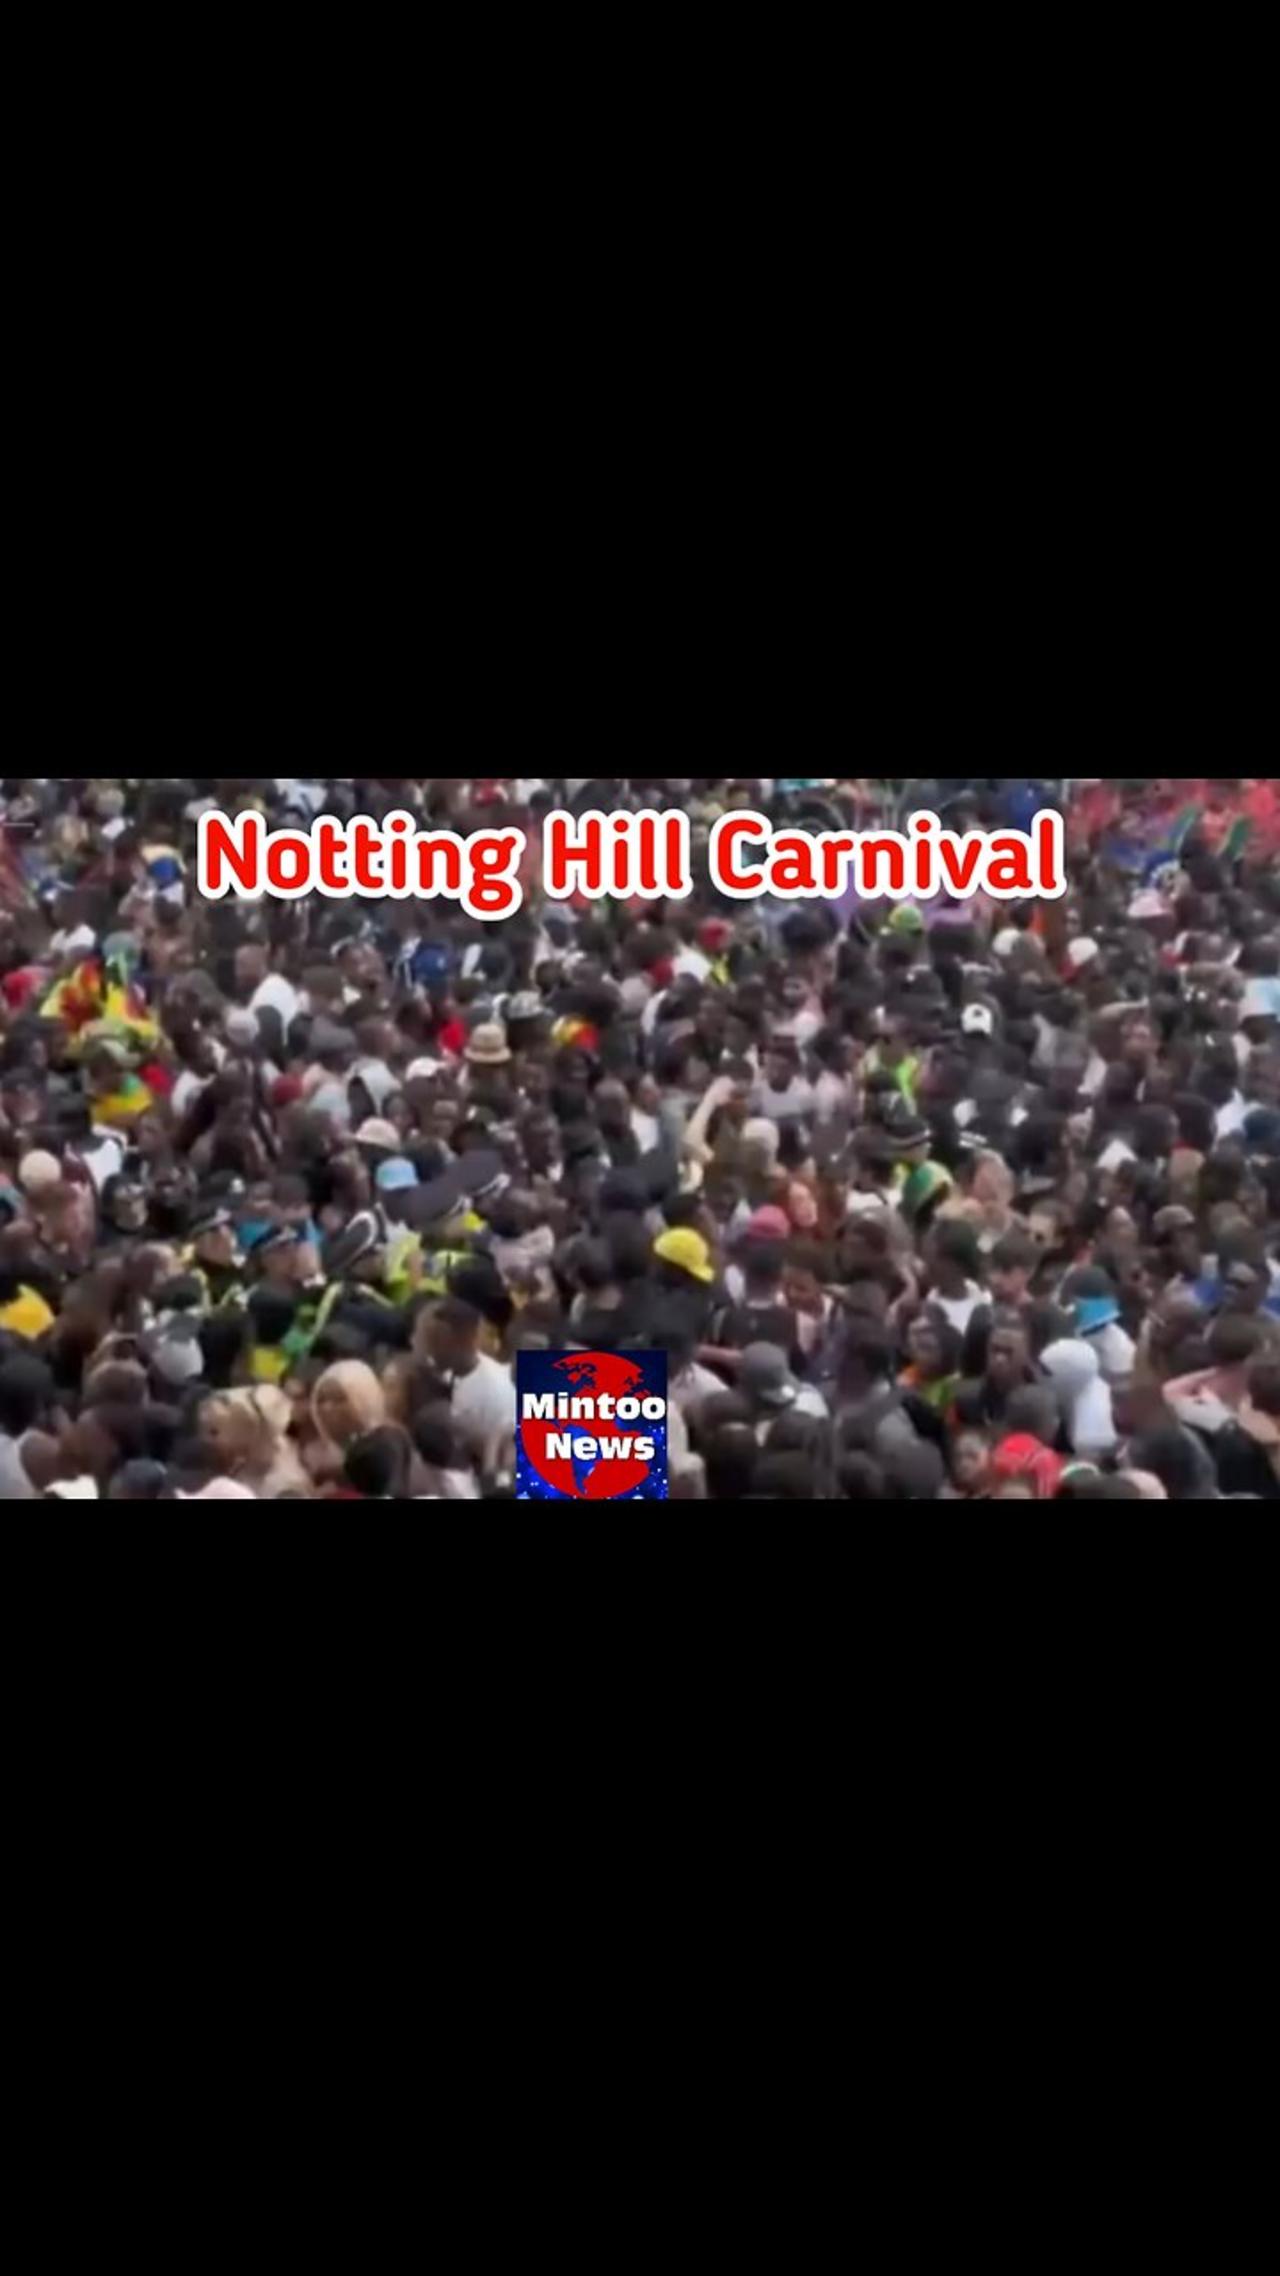 Notting hill carnival: how to stay safe in a crowd